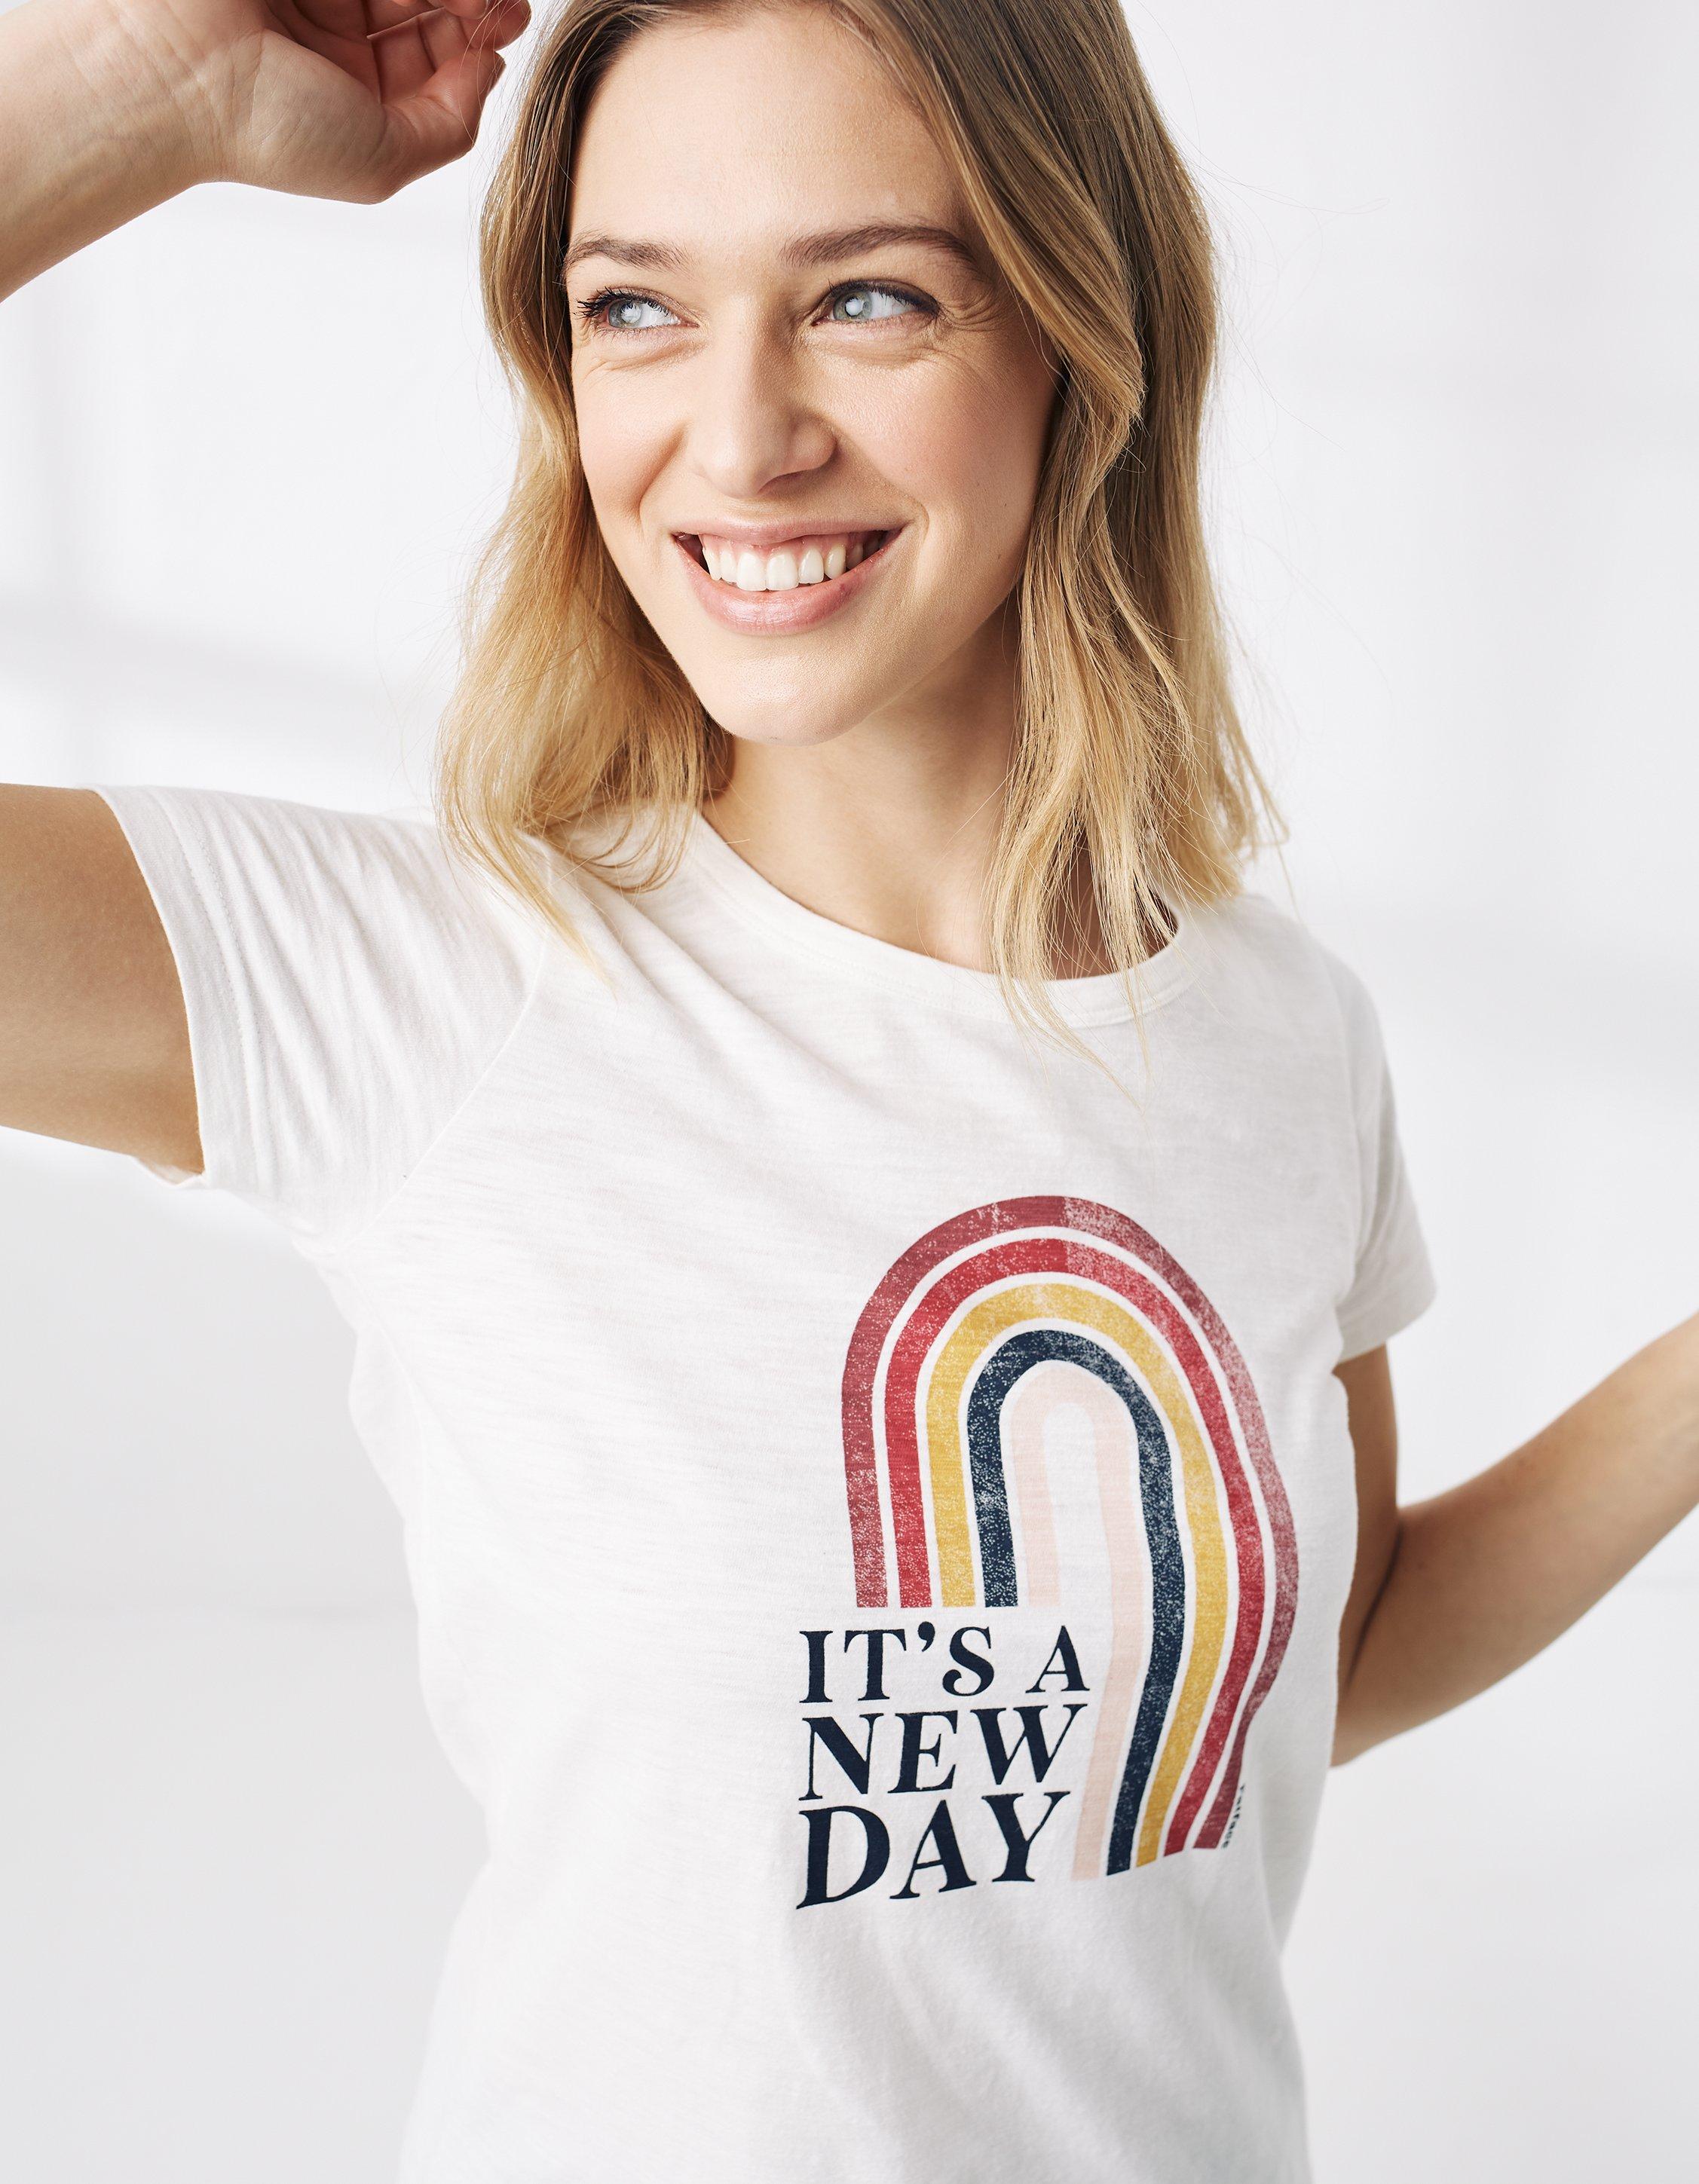 New Day Graphic T-Shirt, Tops & T-Shirts | FatFace.com